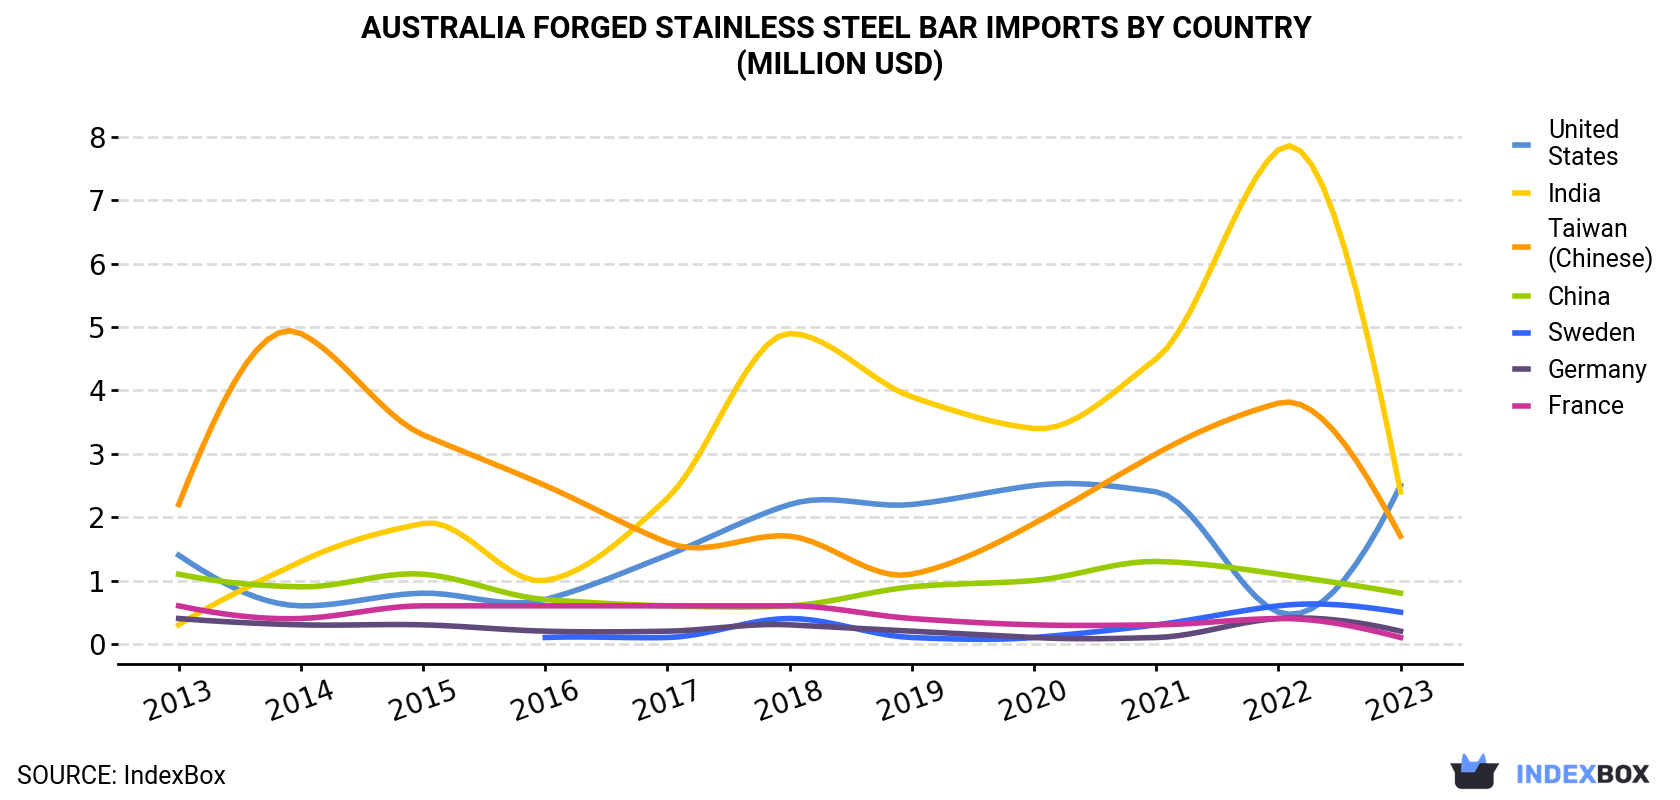 Australia Forged Stainless Steel Bar Imports By Country (Million USD)